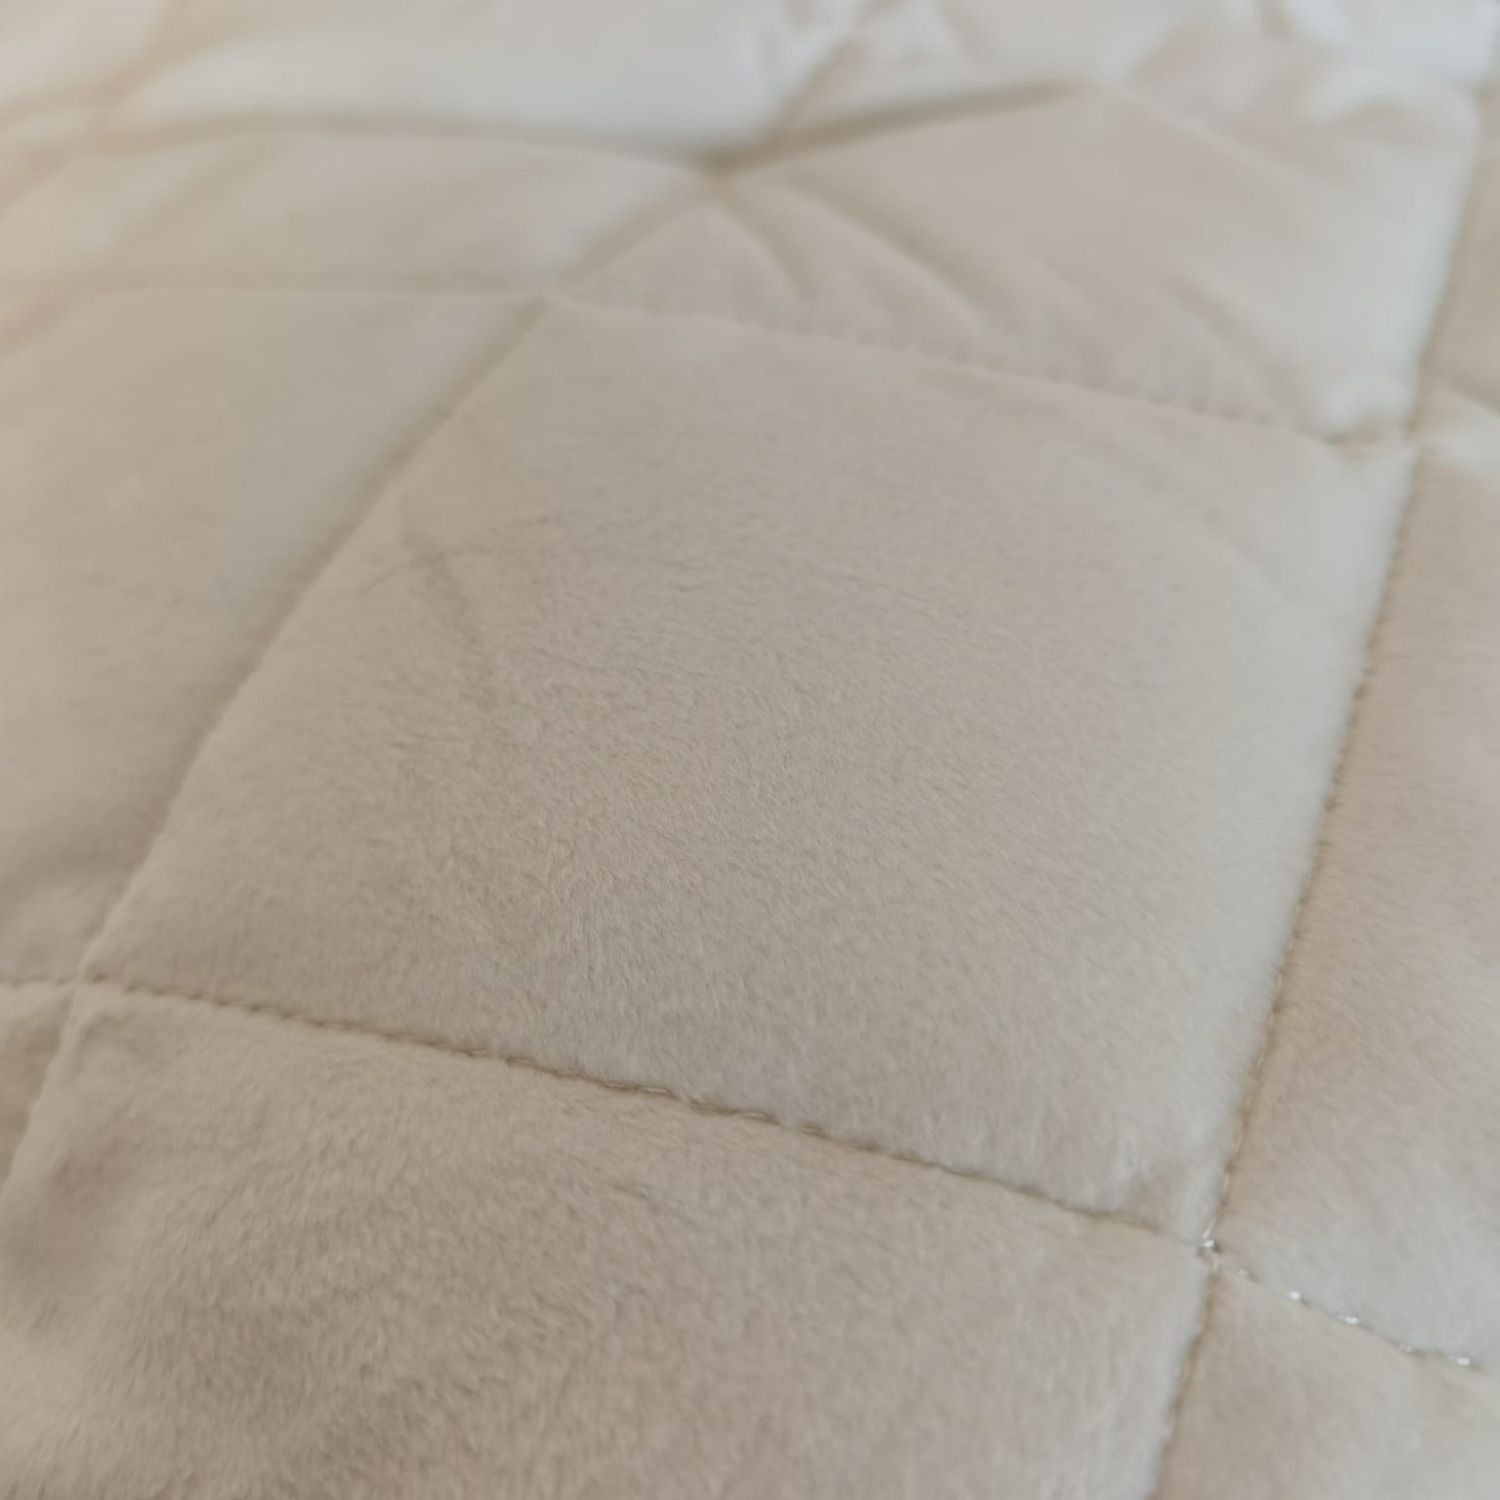 The Home Bedroom Fleece Mattress Protector - White - Super King 4 Shaws Department Stores